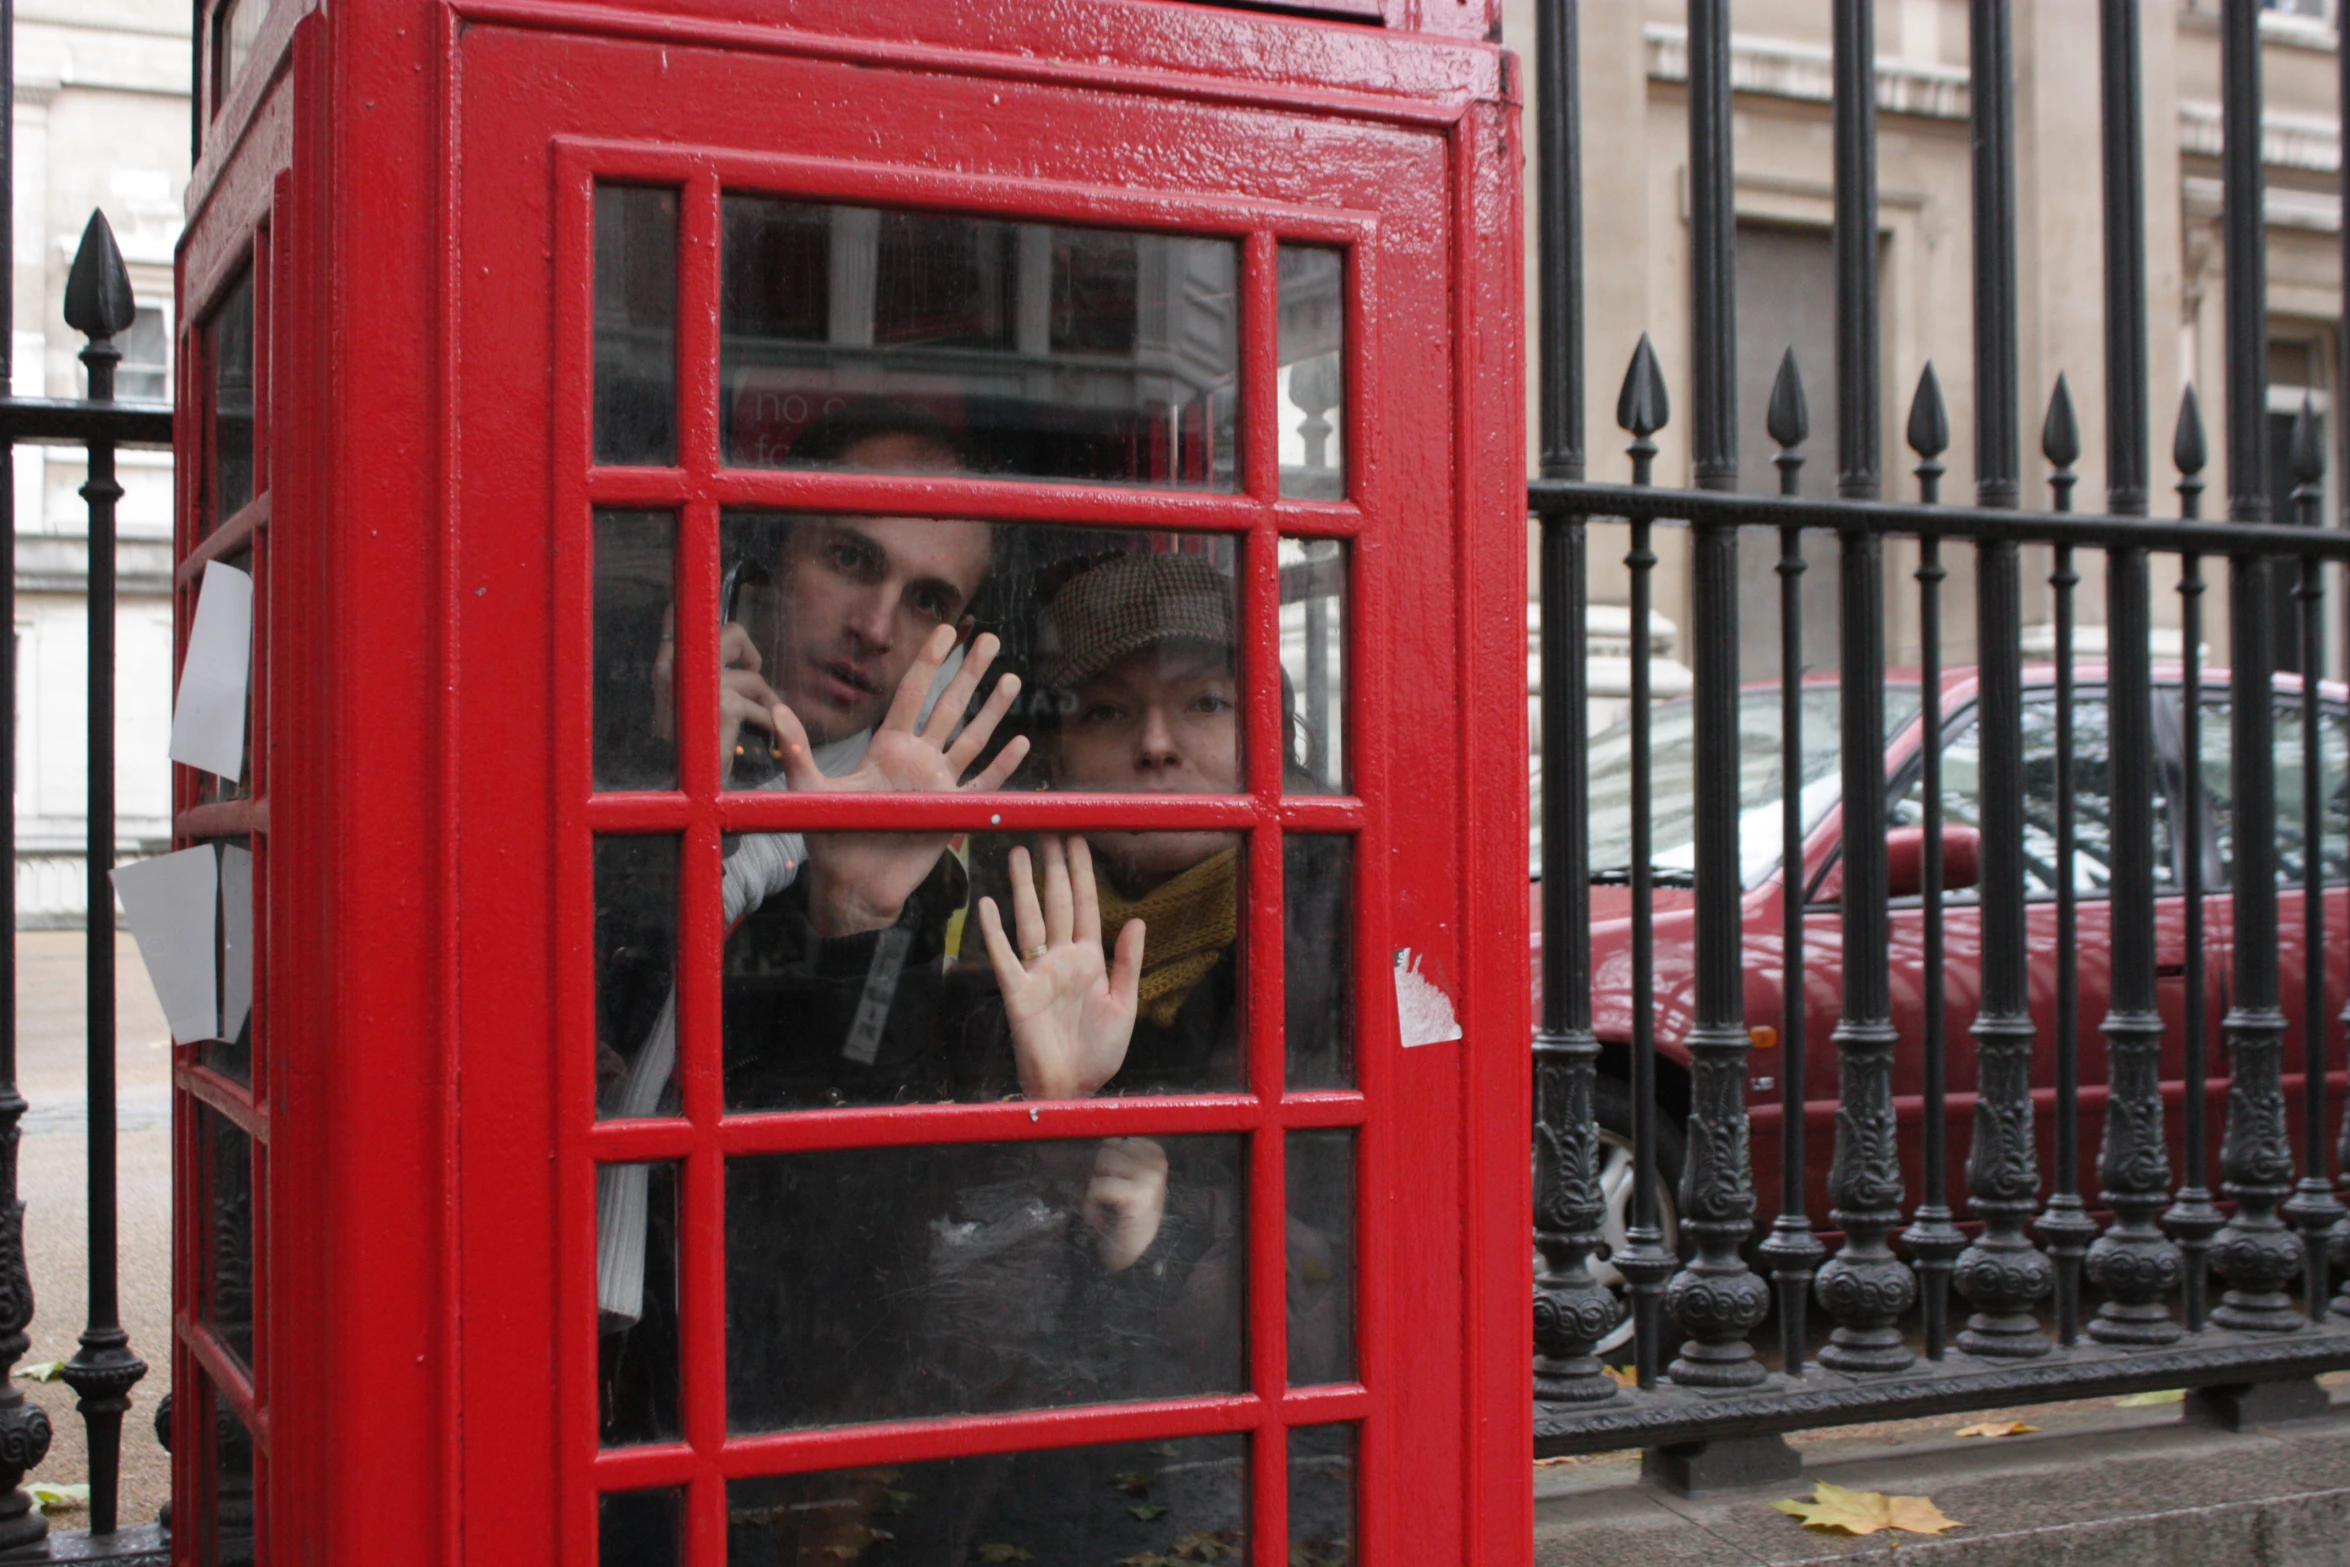 a man and a woman are inside a red telephone booth